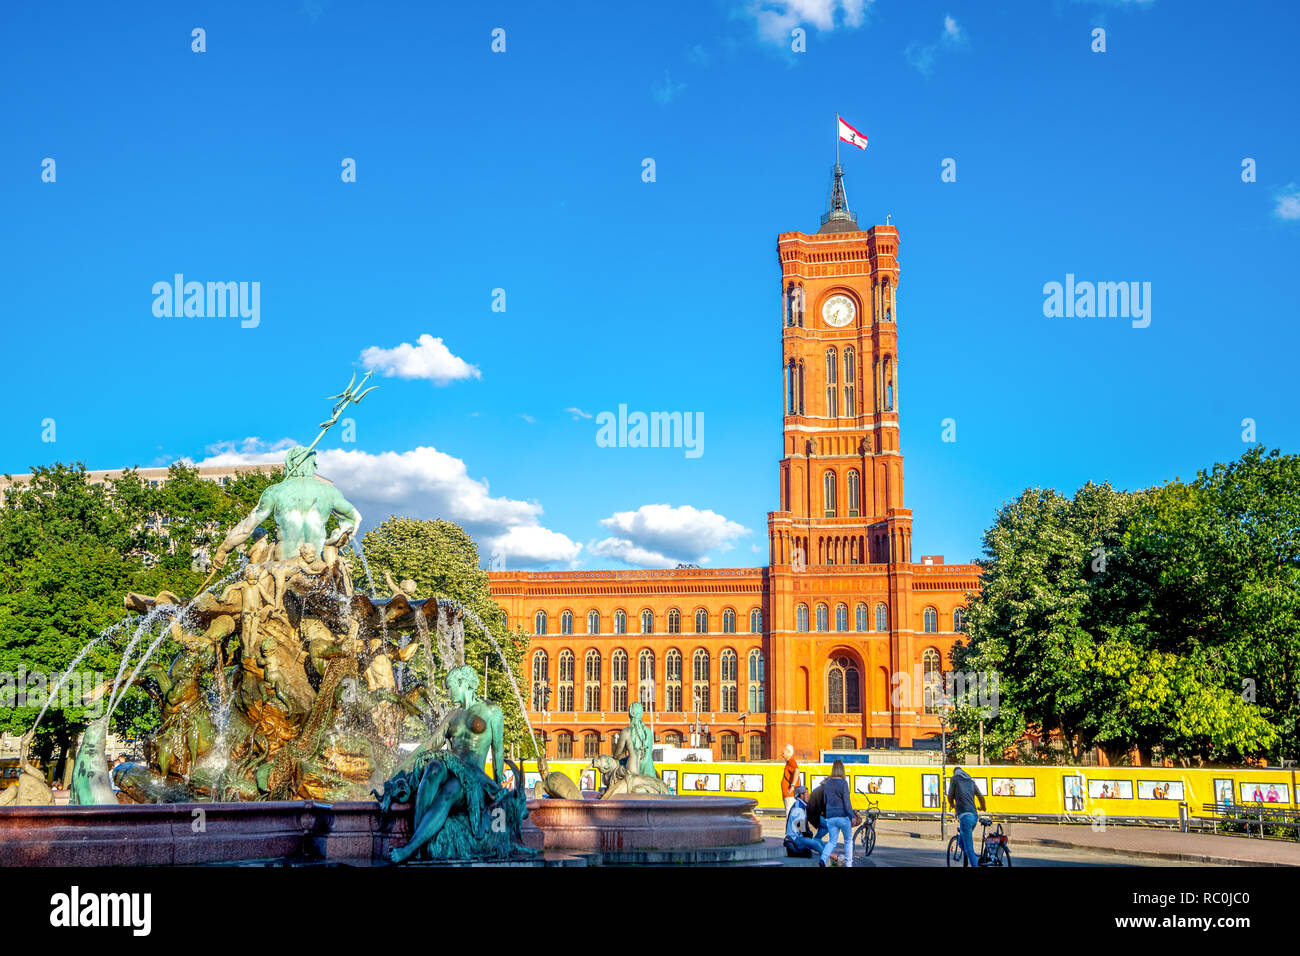 Red town hall, Berlin, Germany Stock Photo